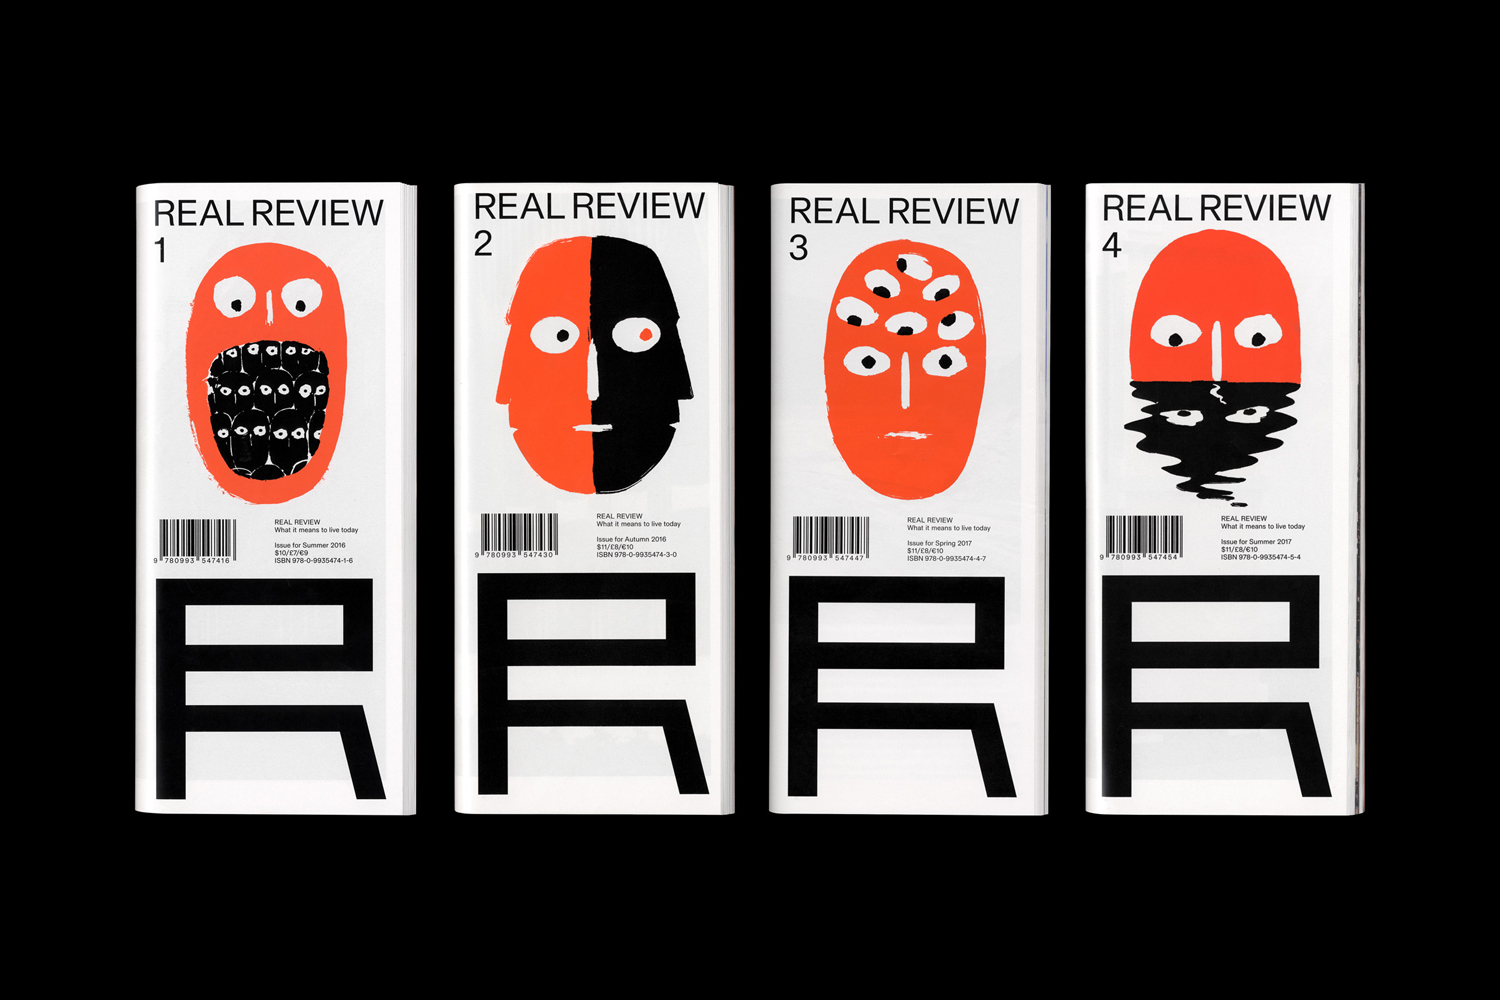 British Design – Real Review designed by OK-RM created and edited by Jack Self